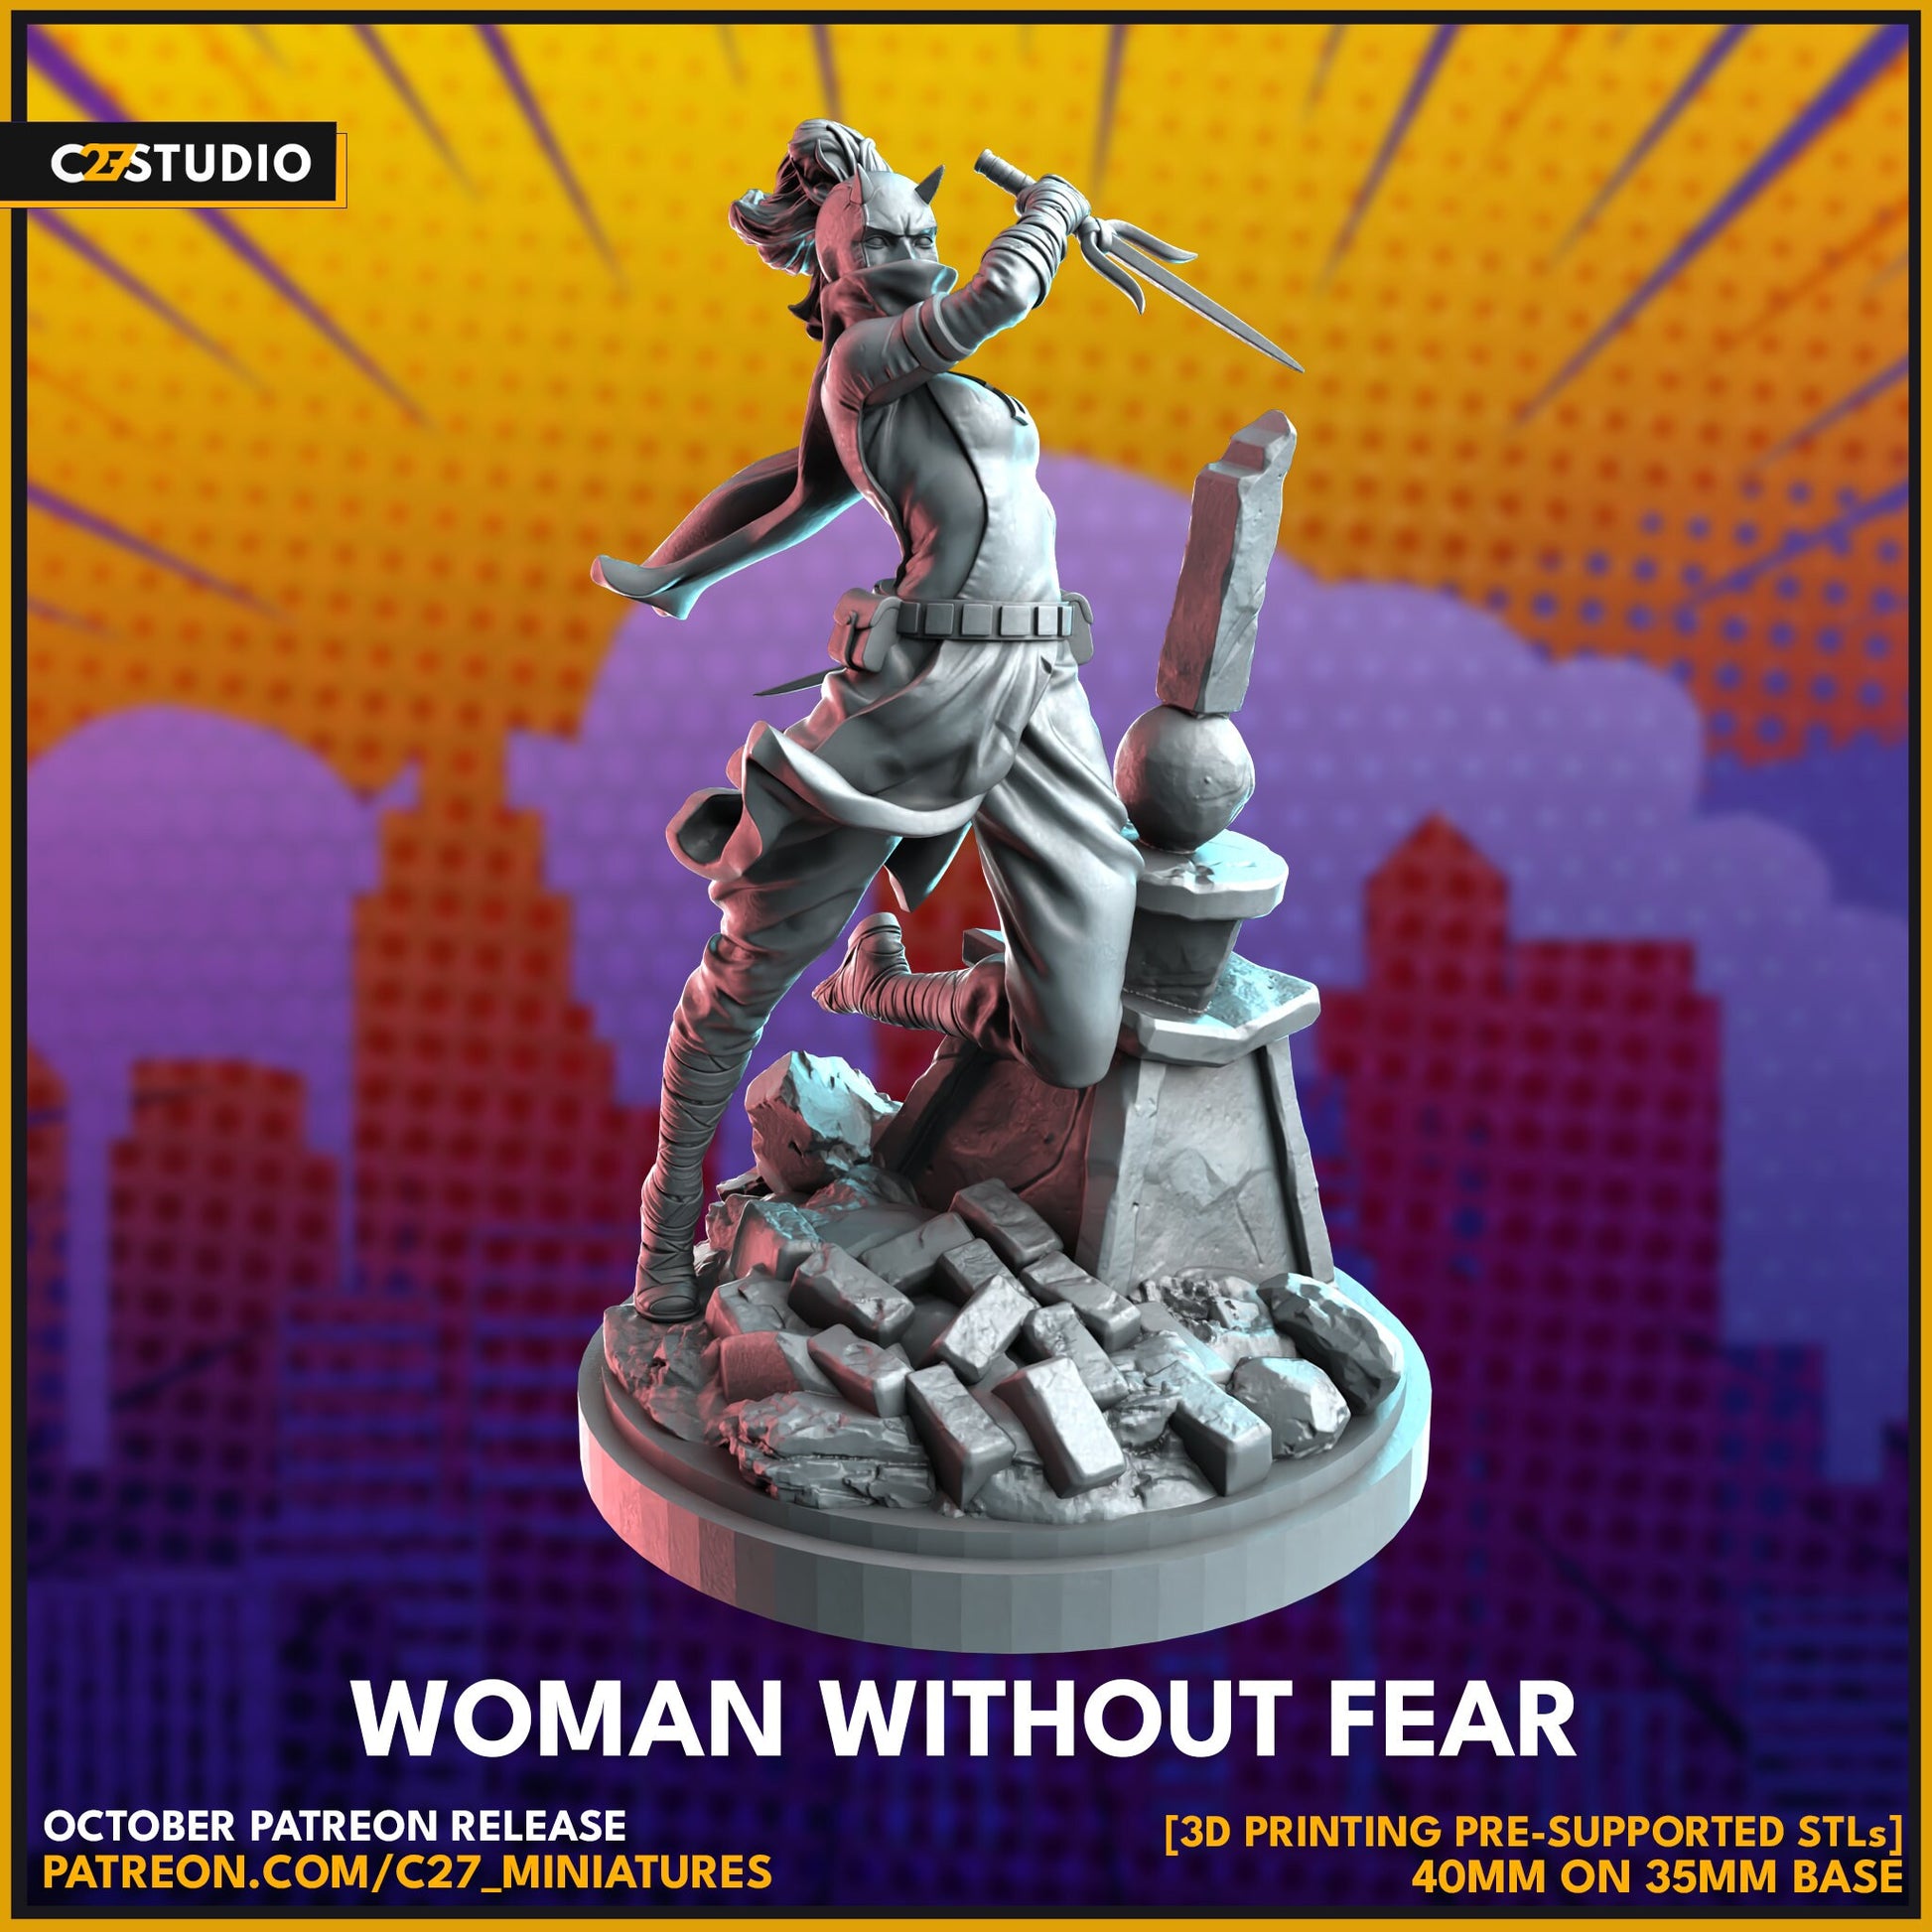 Elektra - Daredevil / Woman Without Fear 40mm miniature (sculpted by C27 collectibles) (Crisis Protocol Proxy/Alternative)